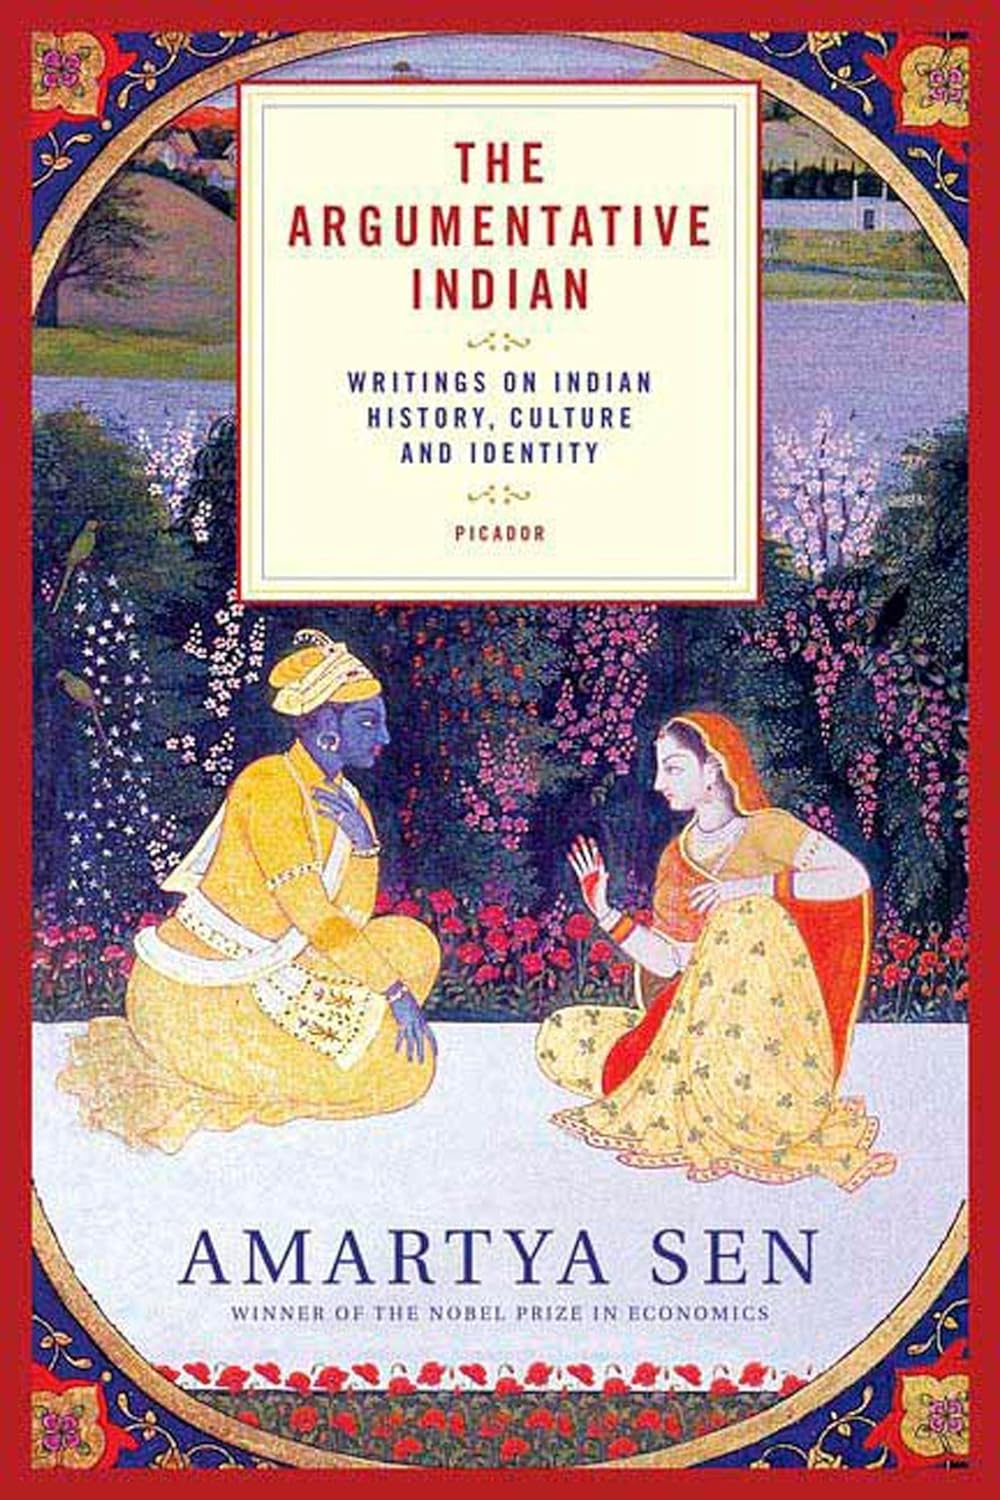 The Argumentative Indian Writings on Indian History, Culture and Identity by Amartya Sen